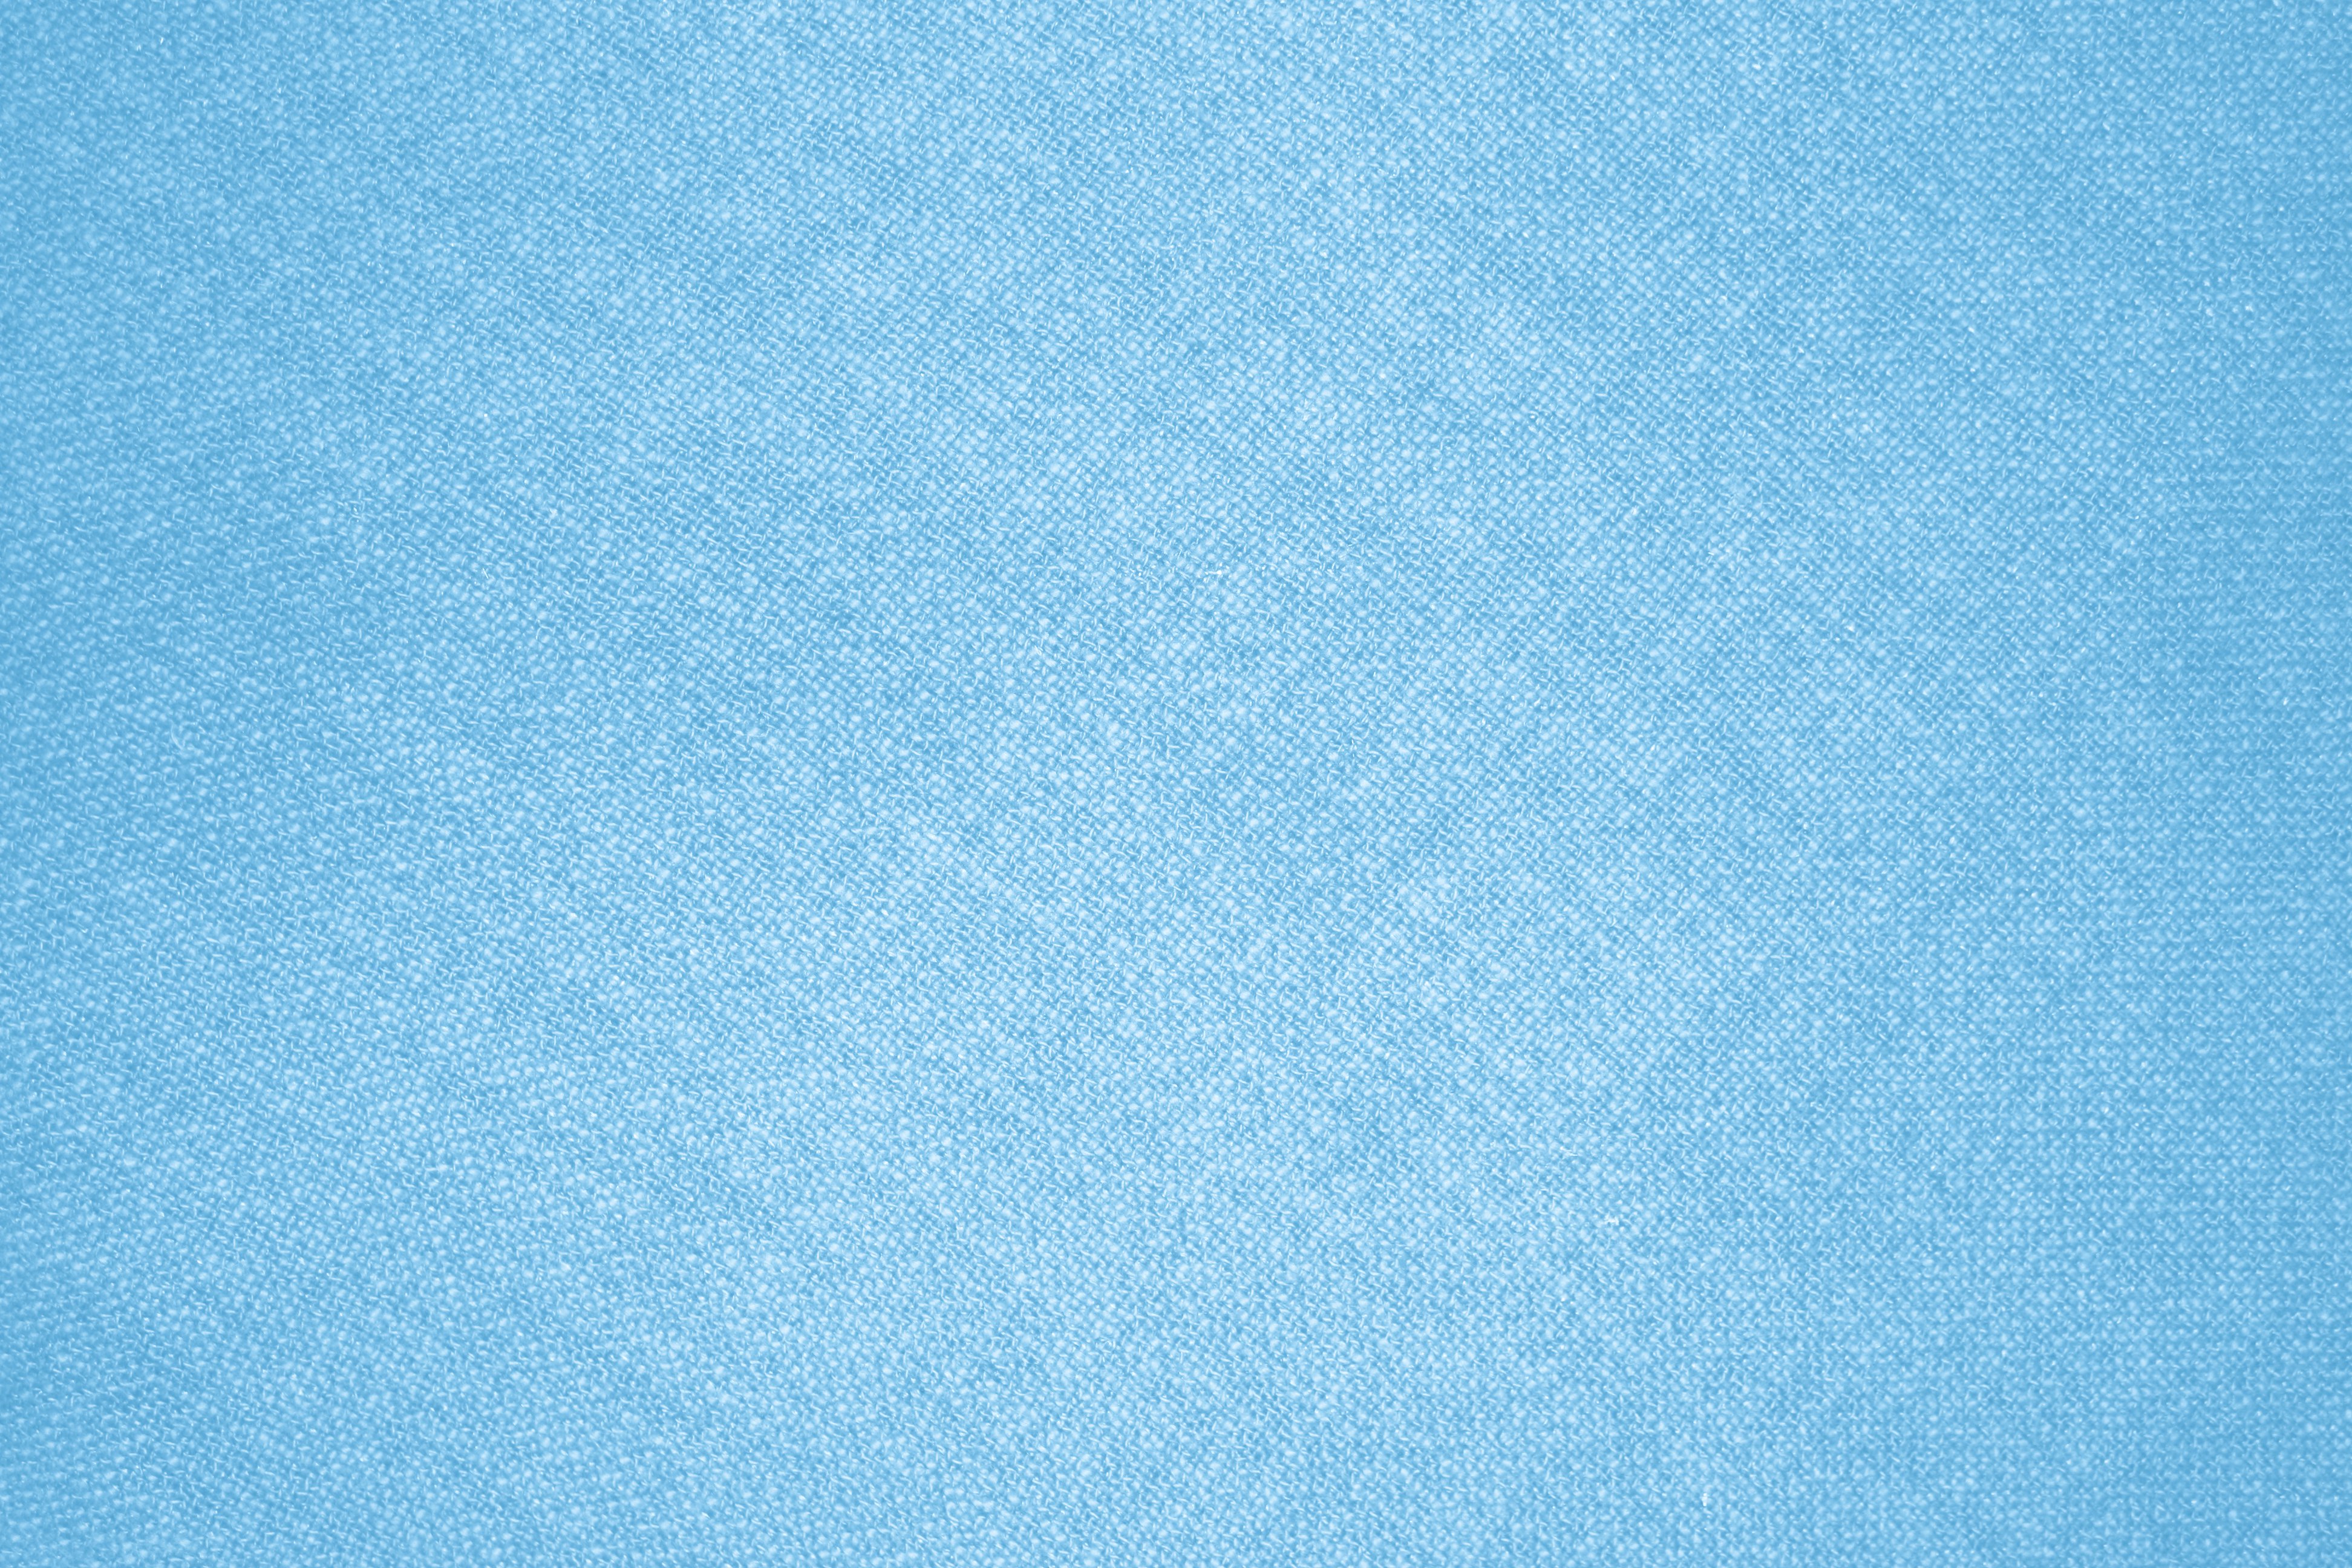 Baby Blue Fabric Texture Picture Free Photograph Photos Public